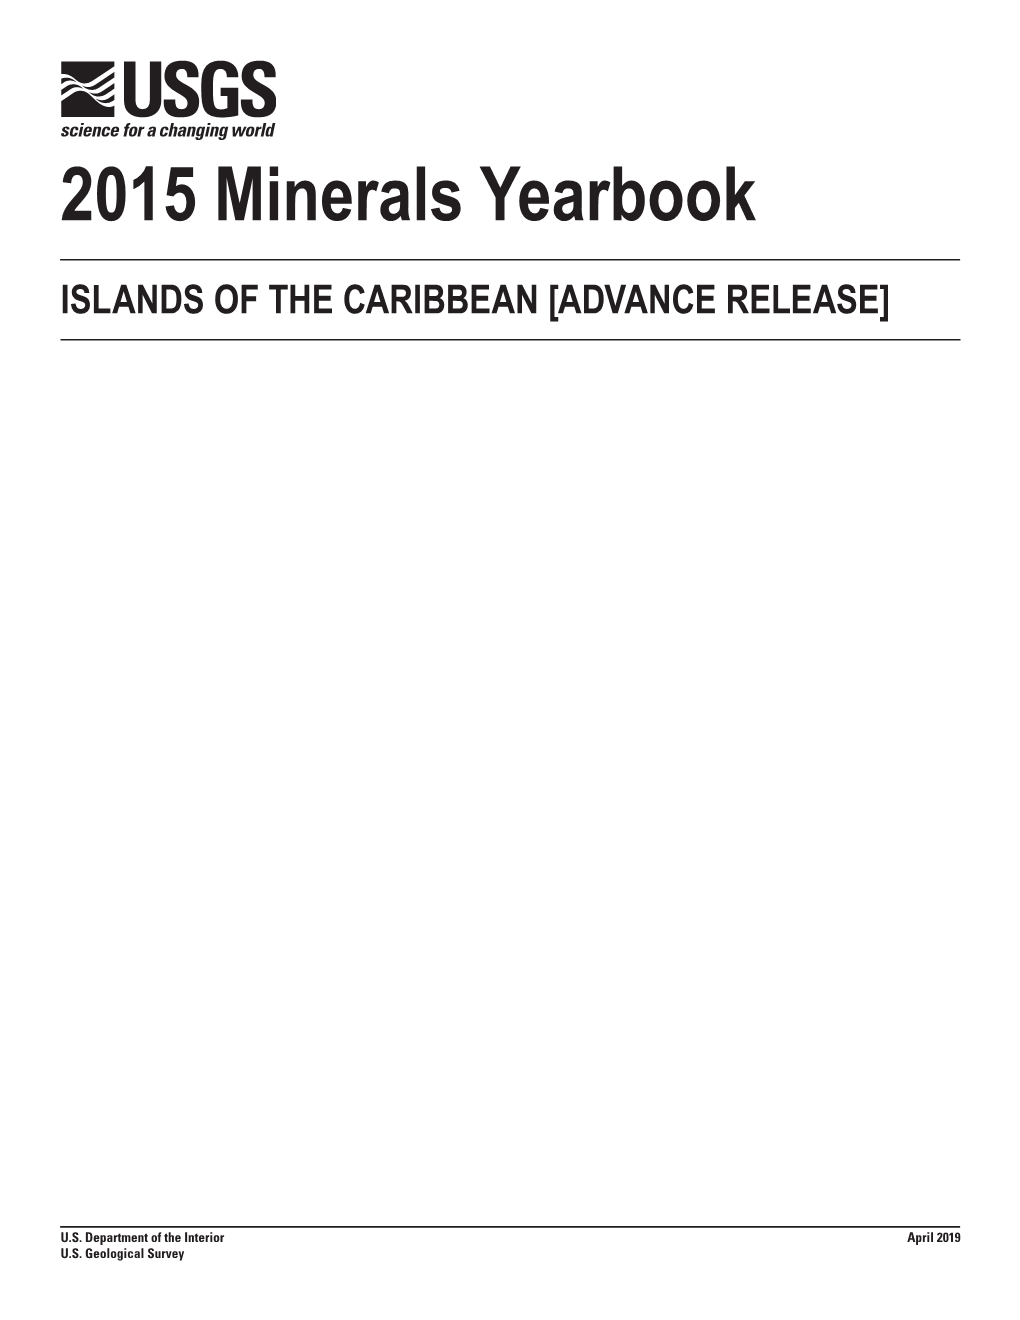 The Mineral Industries of the Islands of the Caribbean in 2015